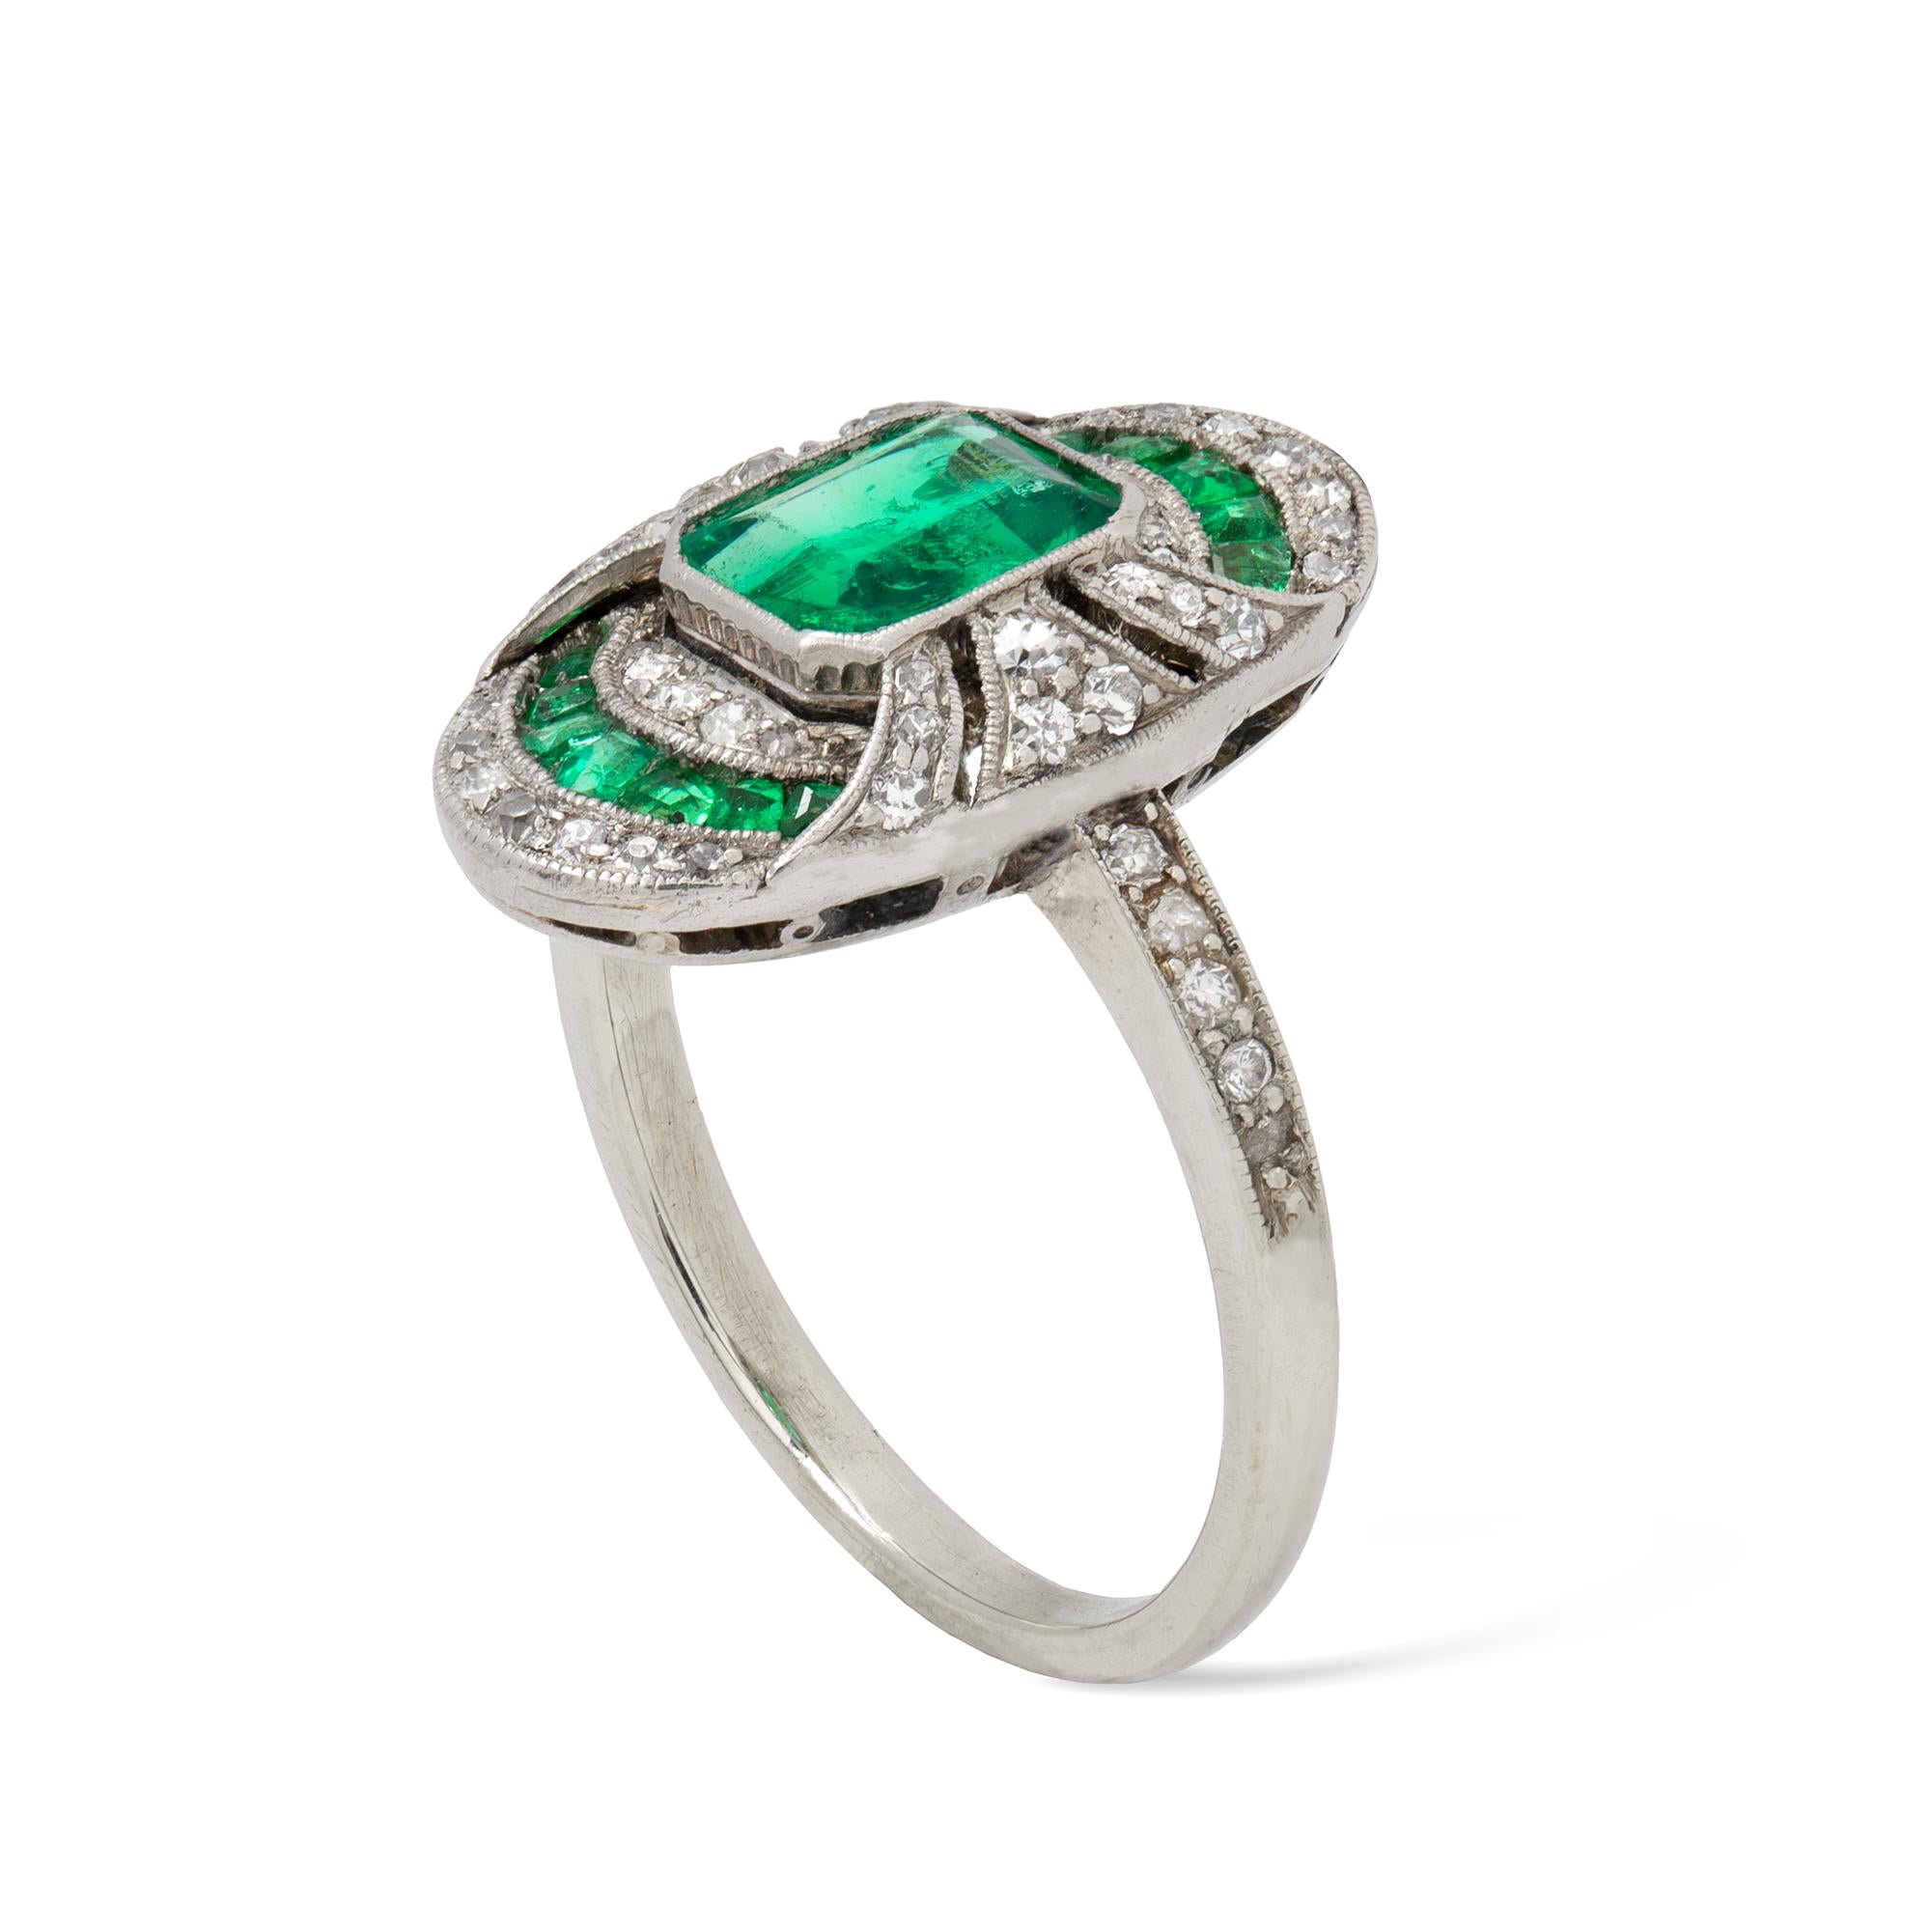 An Art Deco emerald and diamond ring, the octagonal-cut emerald with estimated weight 0.7 carats rub-over millegrain set to the centre of an oval plaque, set with old brilliant-cut diamonds and calibre-cut emeralds, all set in platinum, circa 1920,